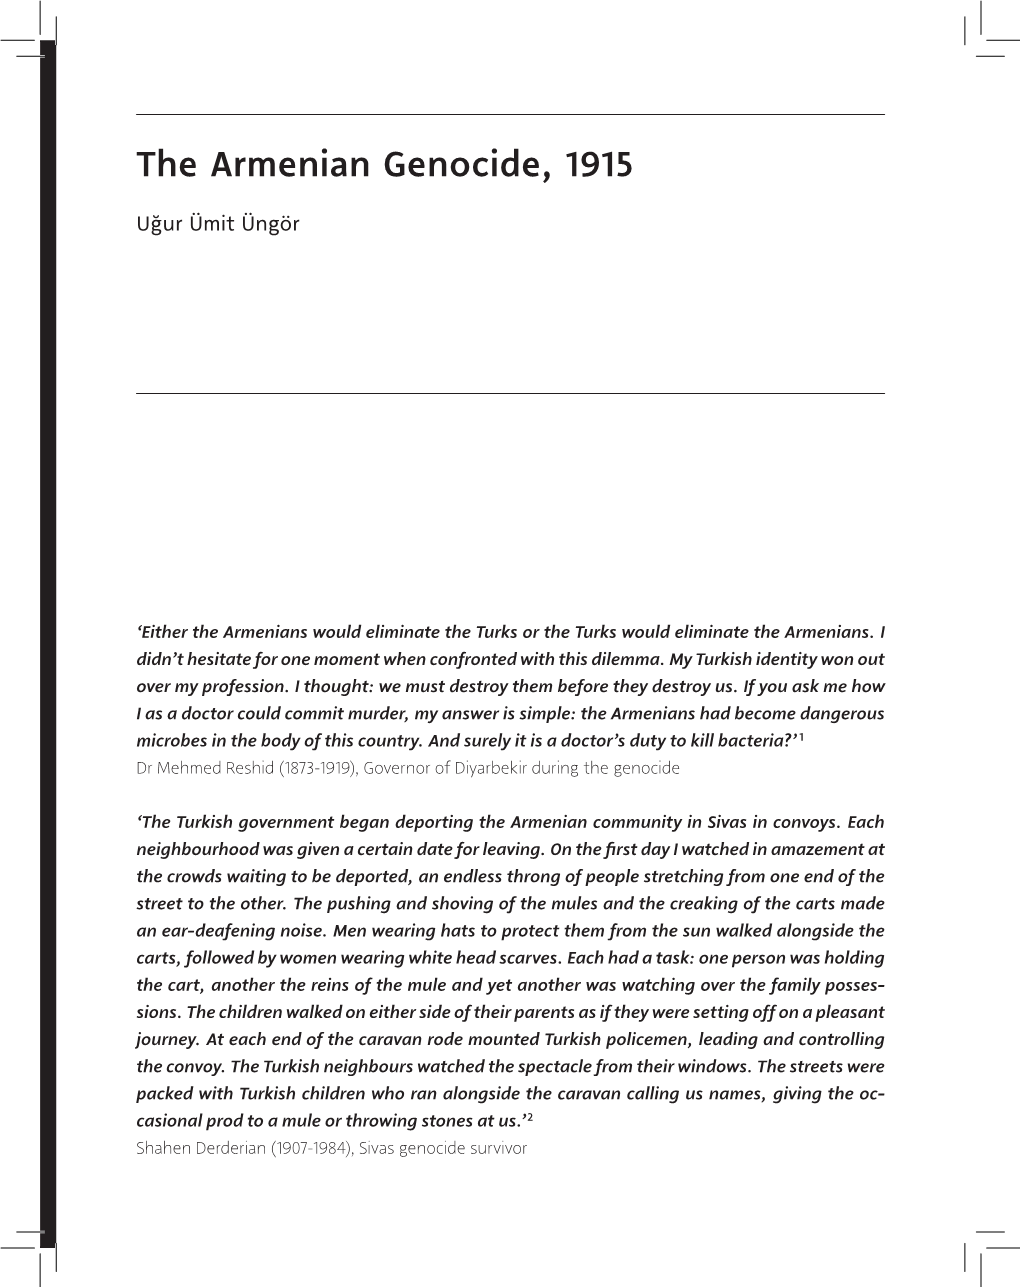 The Armenian Genocide, 1915